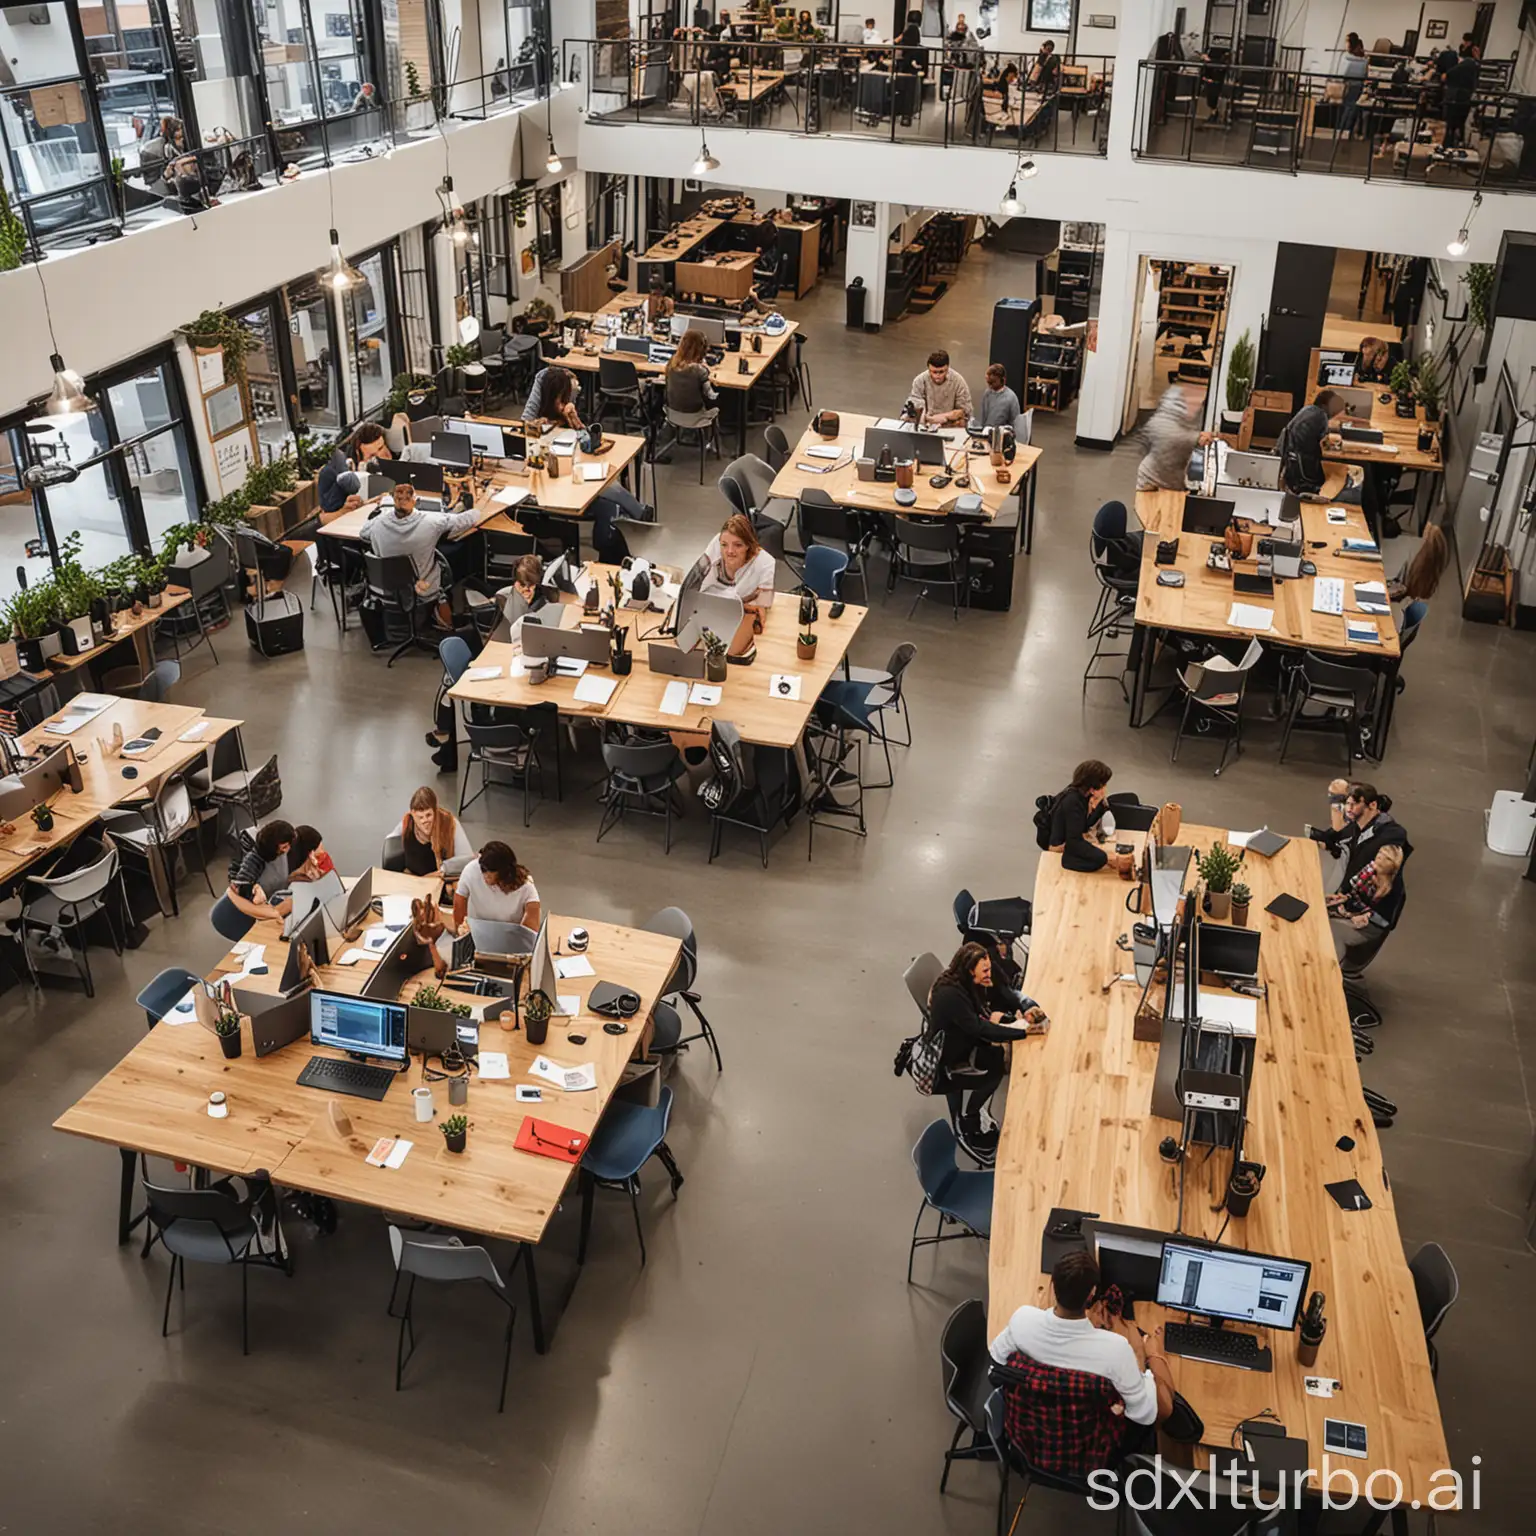 An aerial view of a modern co-working space. The space is filled with desks, chairs, and people working. There are also a few meeting rooms and a coffee bar.